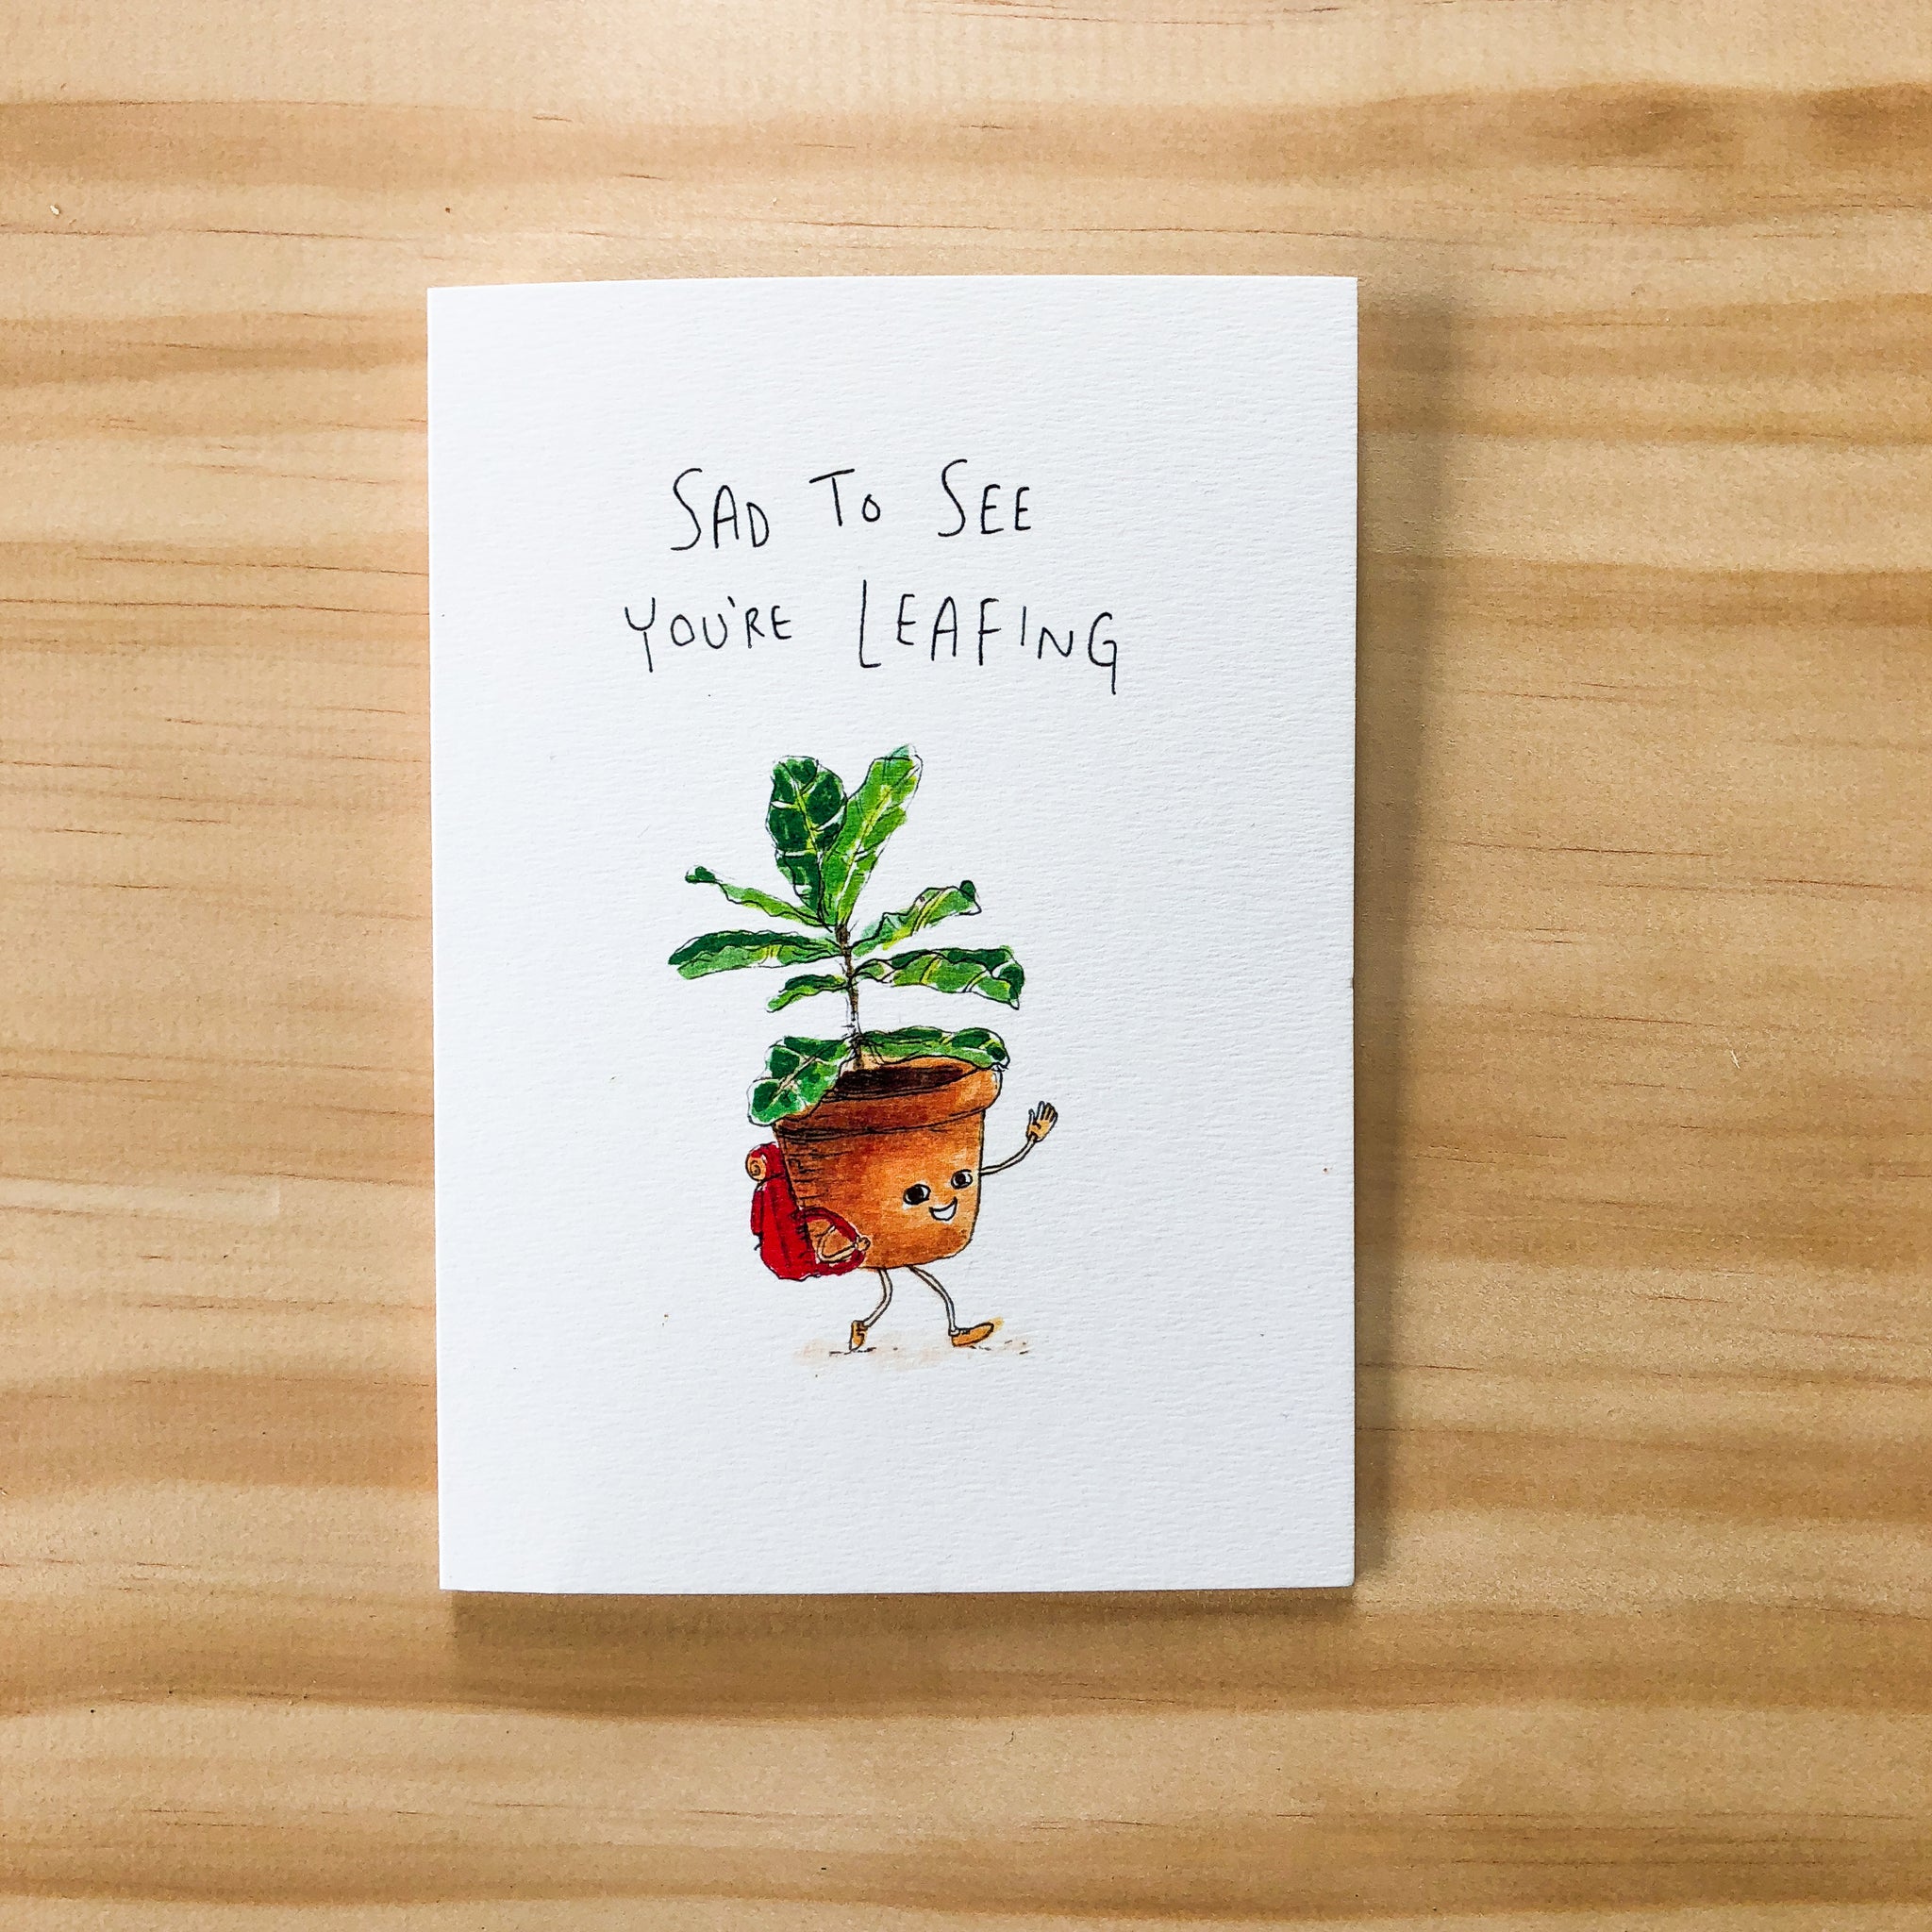 Sad to See You're Leafing - Well Drawn